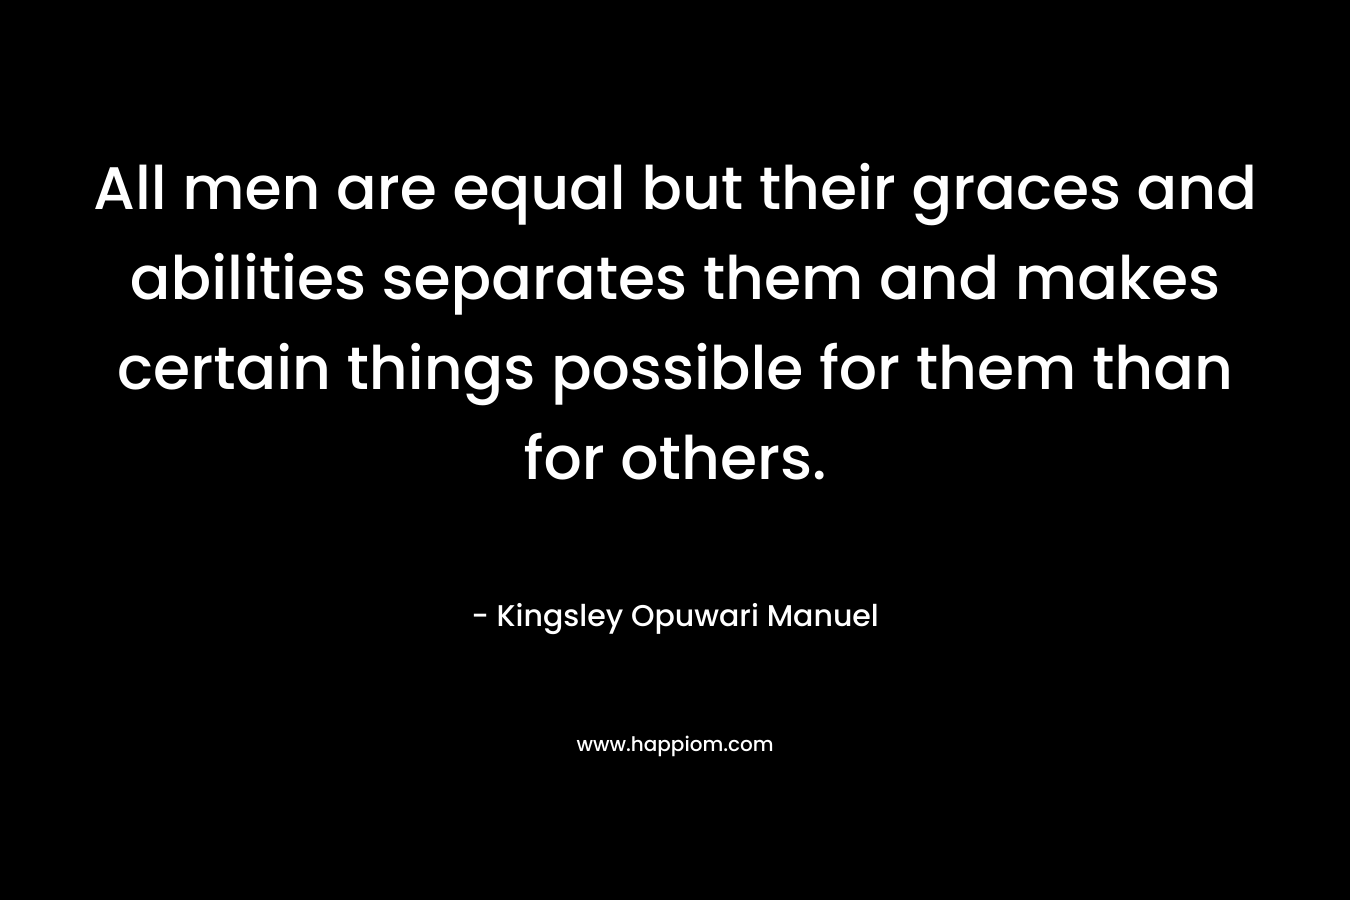 All men are equal but their graces and abilities separates them and makes certain things possible for them than for others.